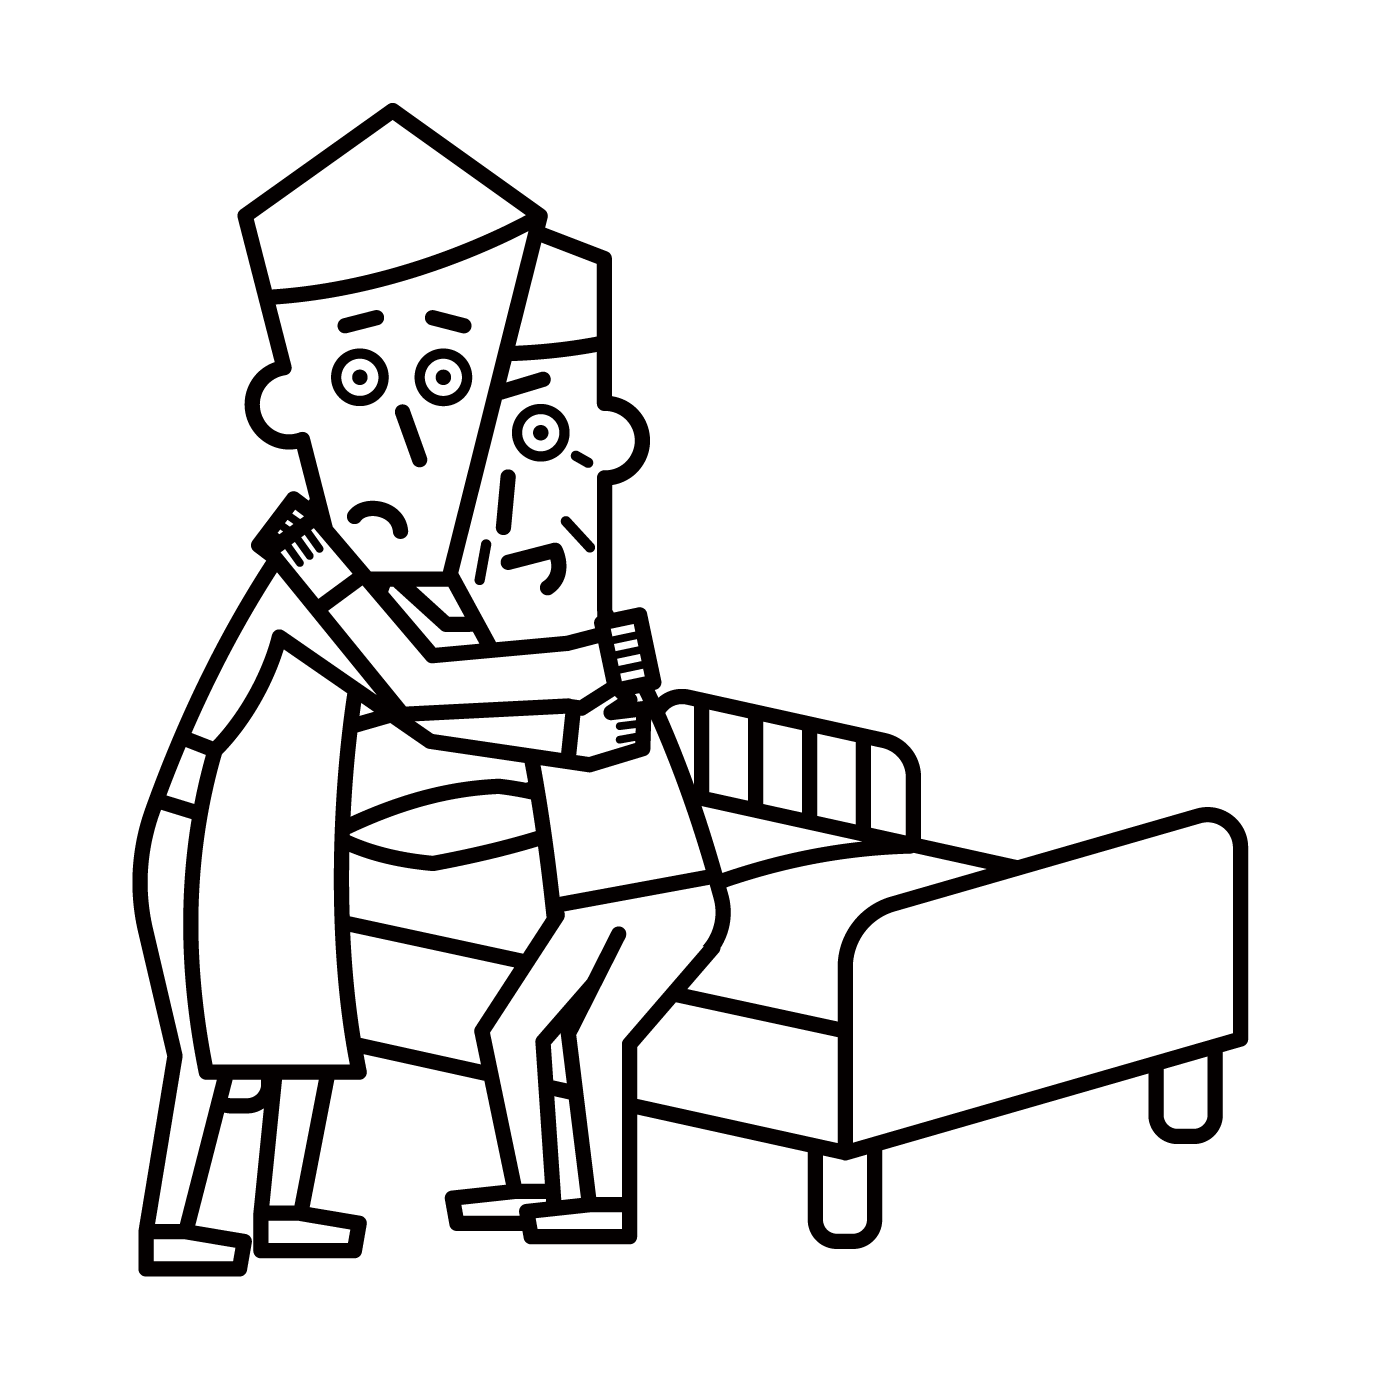 Illustration of a man caring for the elderly